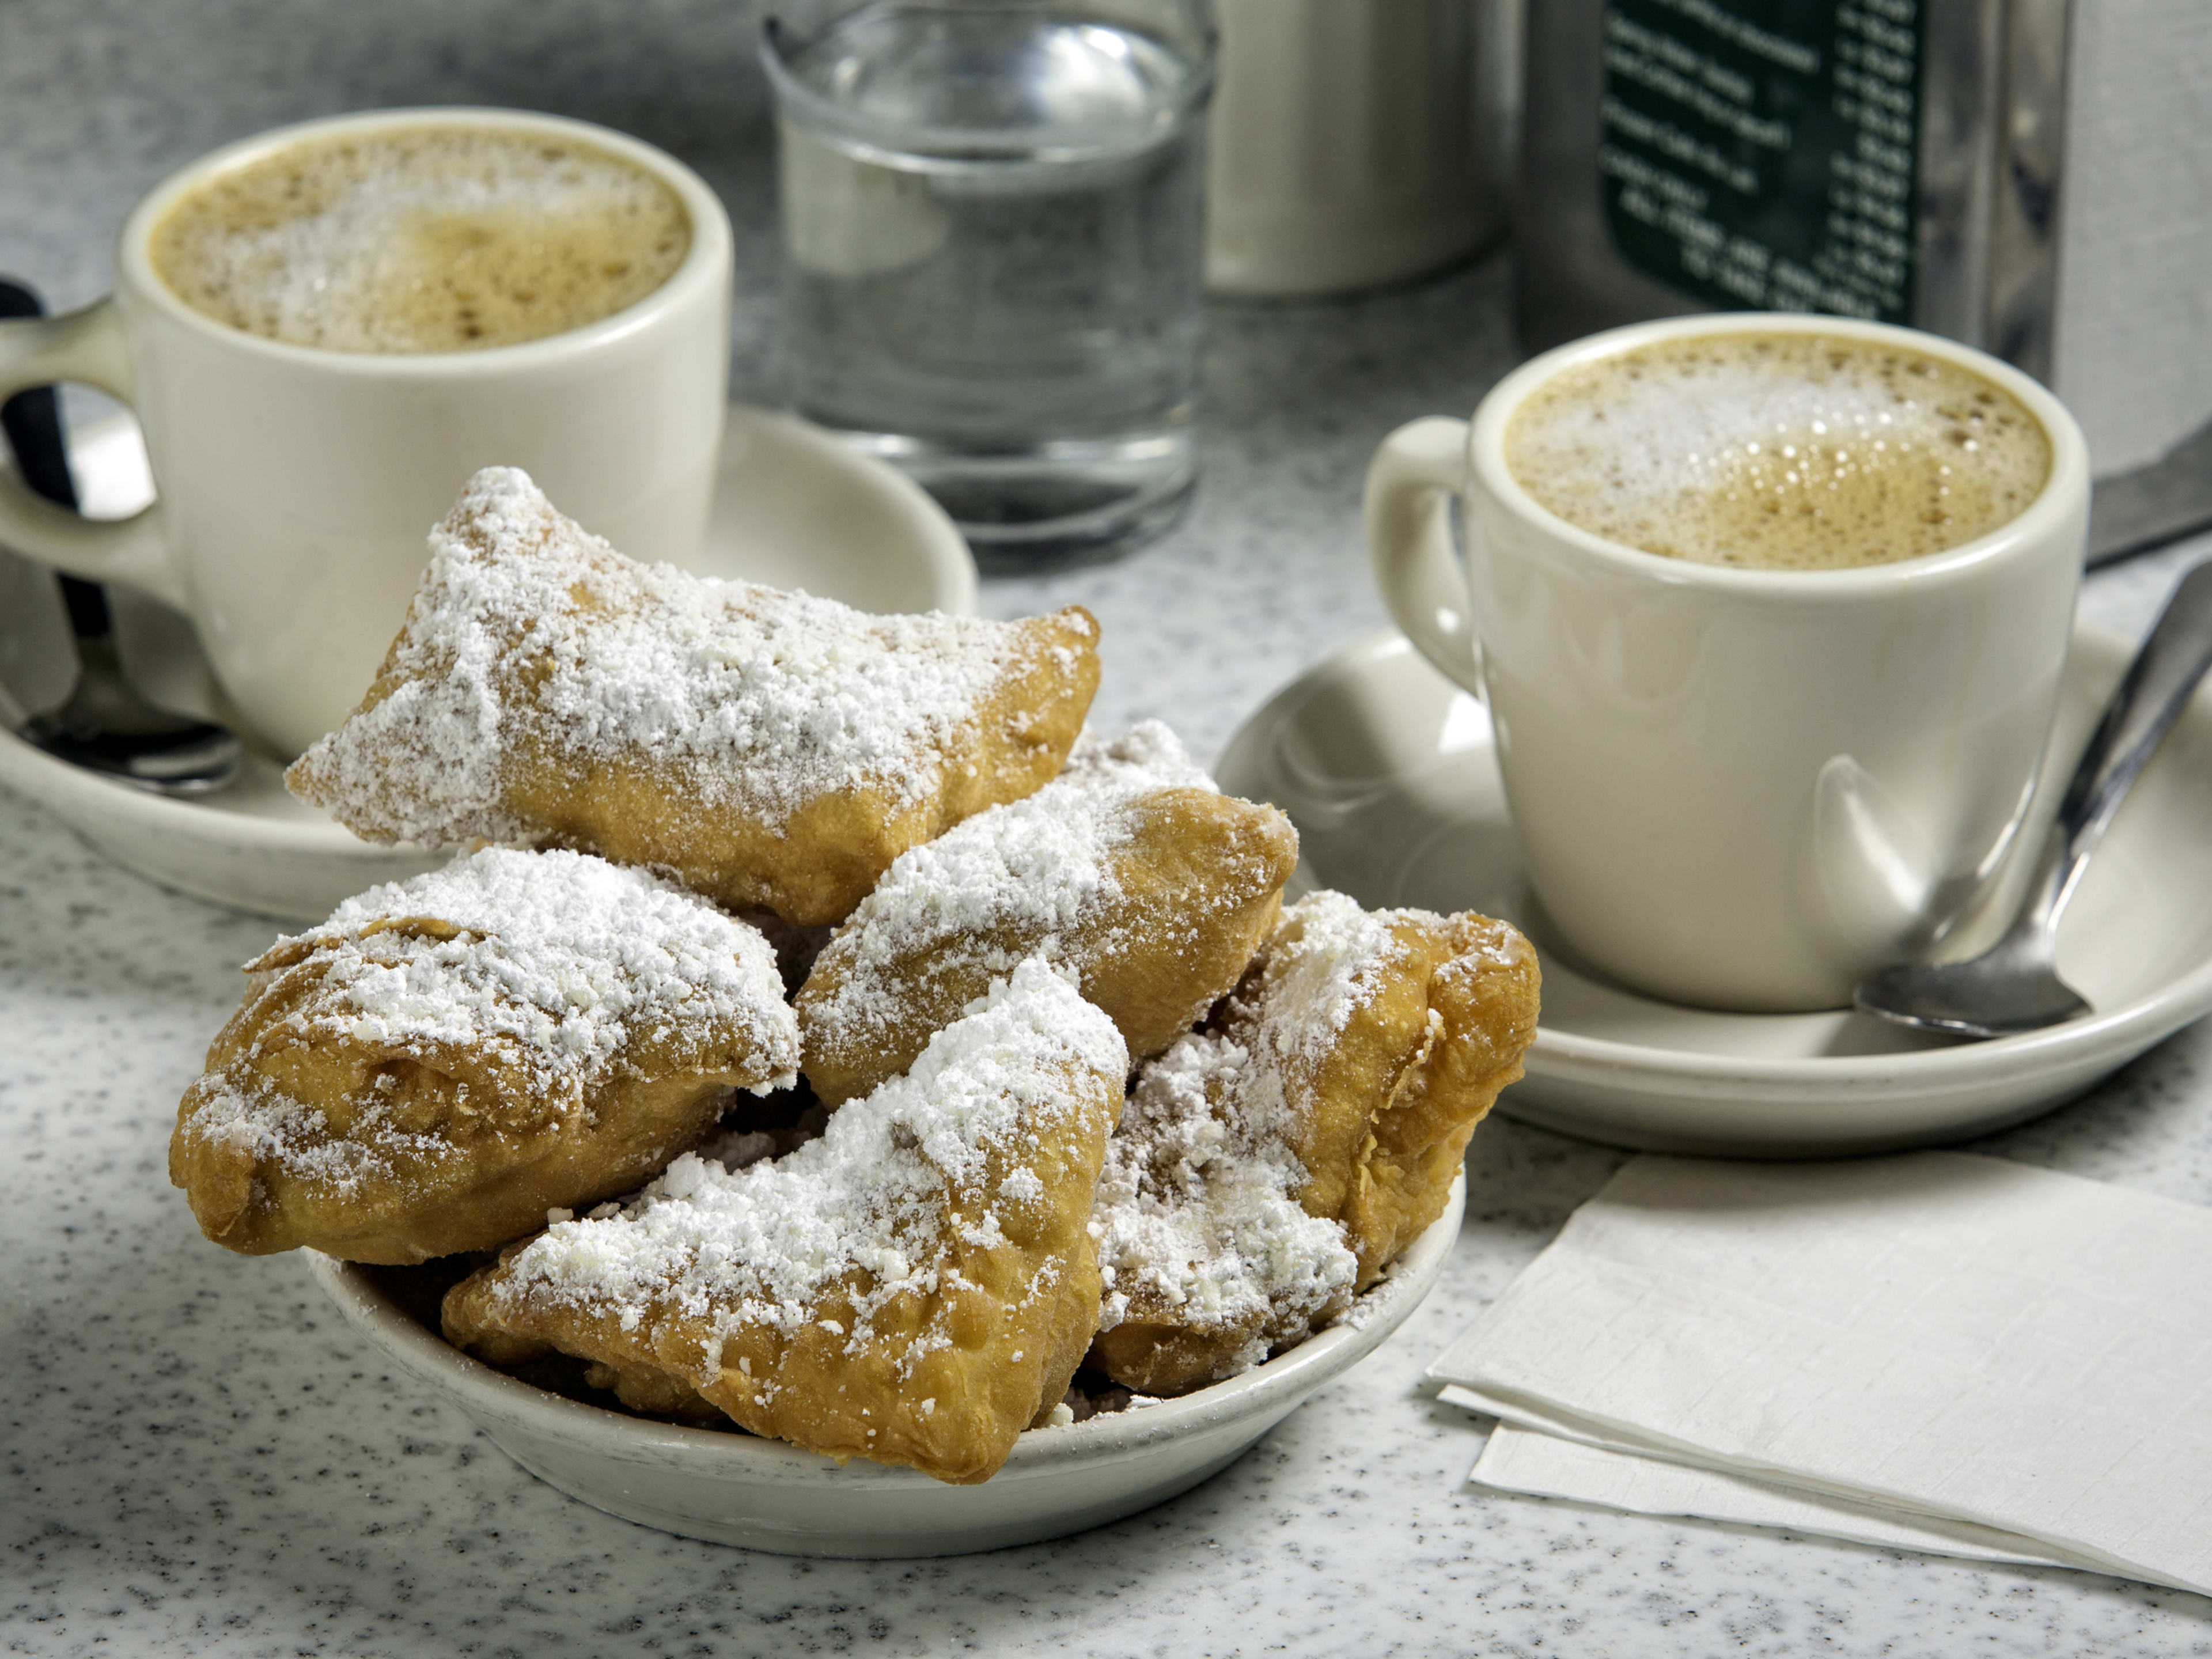 Coffee and beignets at Cafe Du Monde